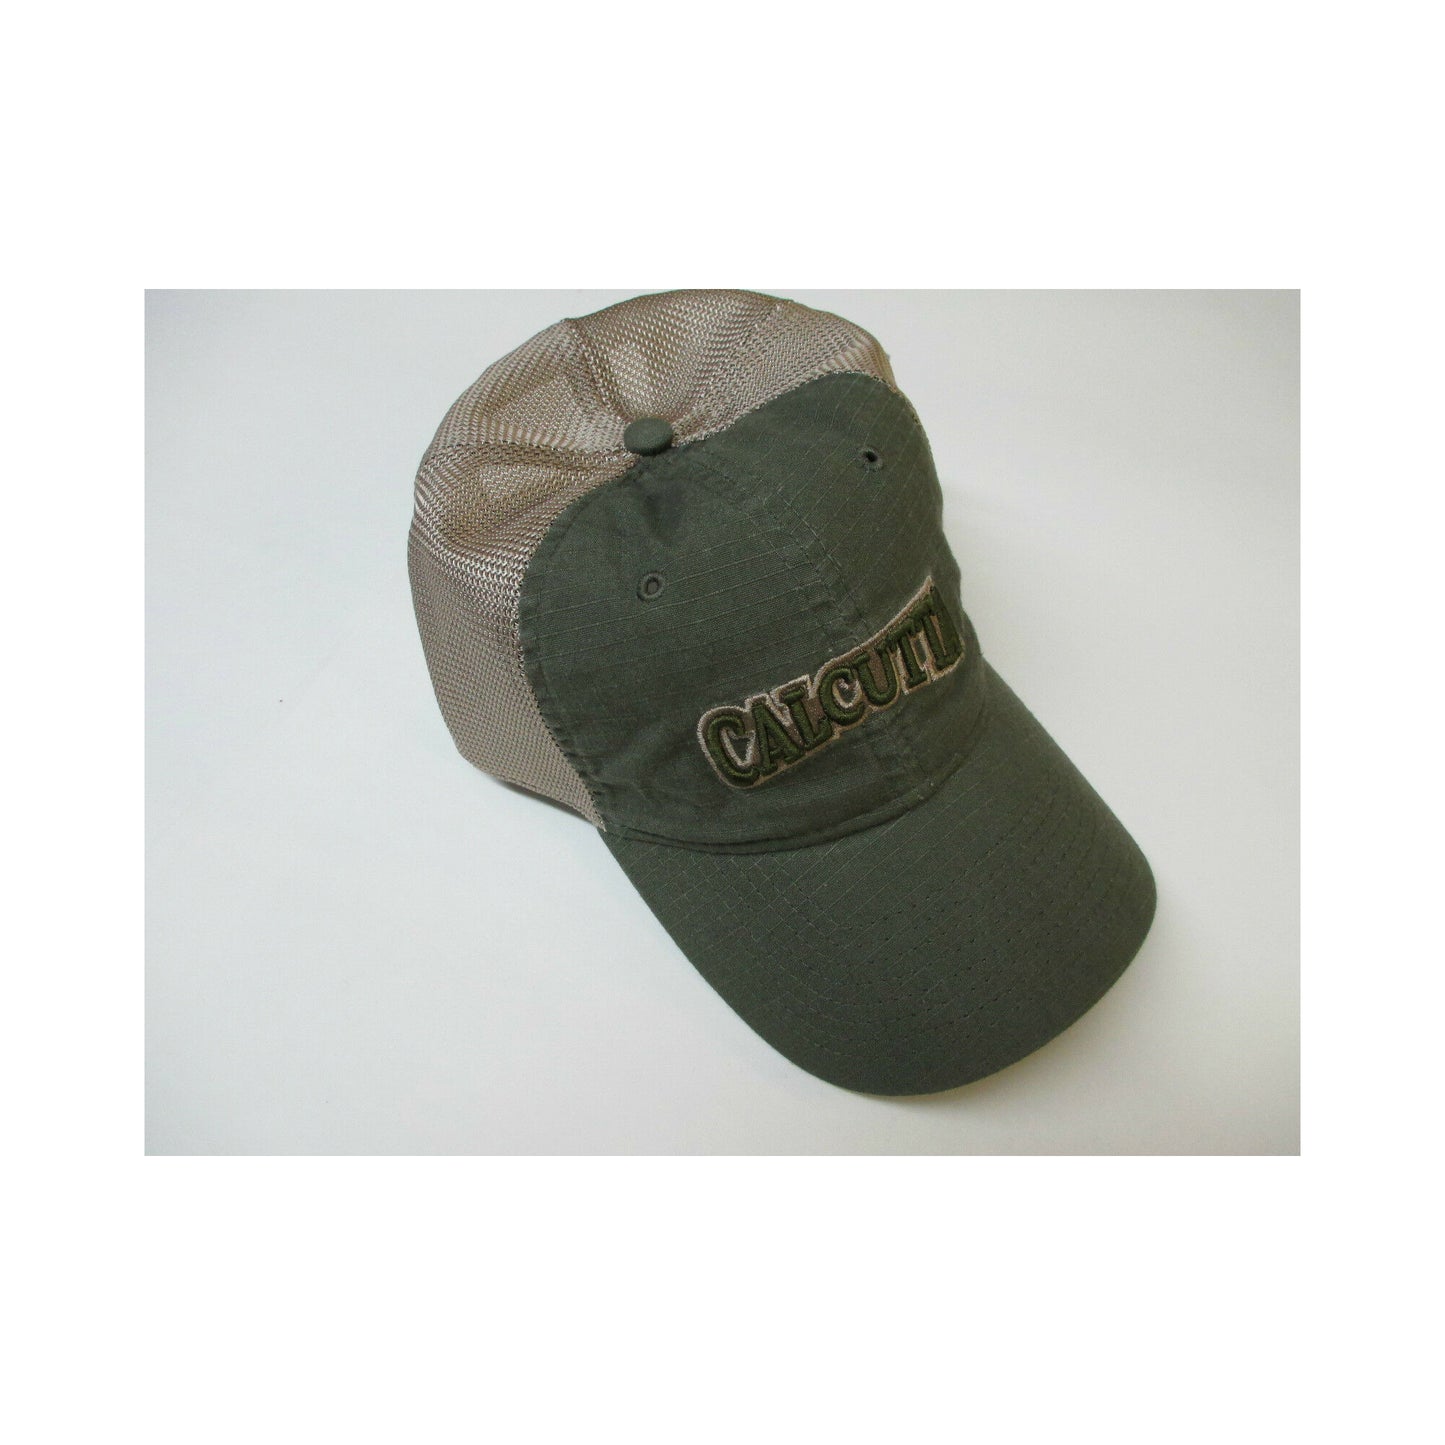 New Authentic Calcutta Hat Olive Green with Calcutta on Front Tan Mesh